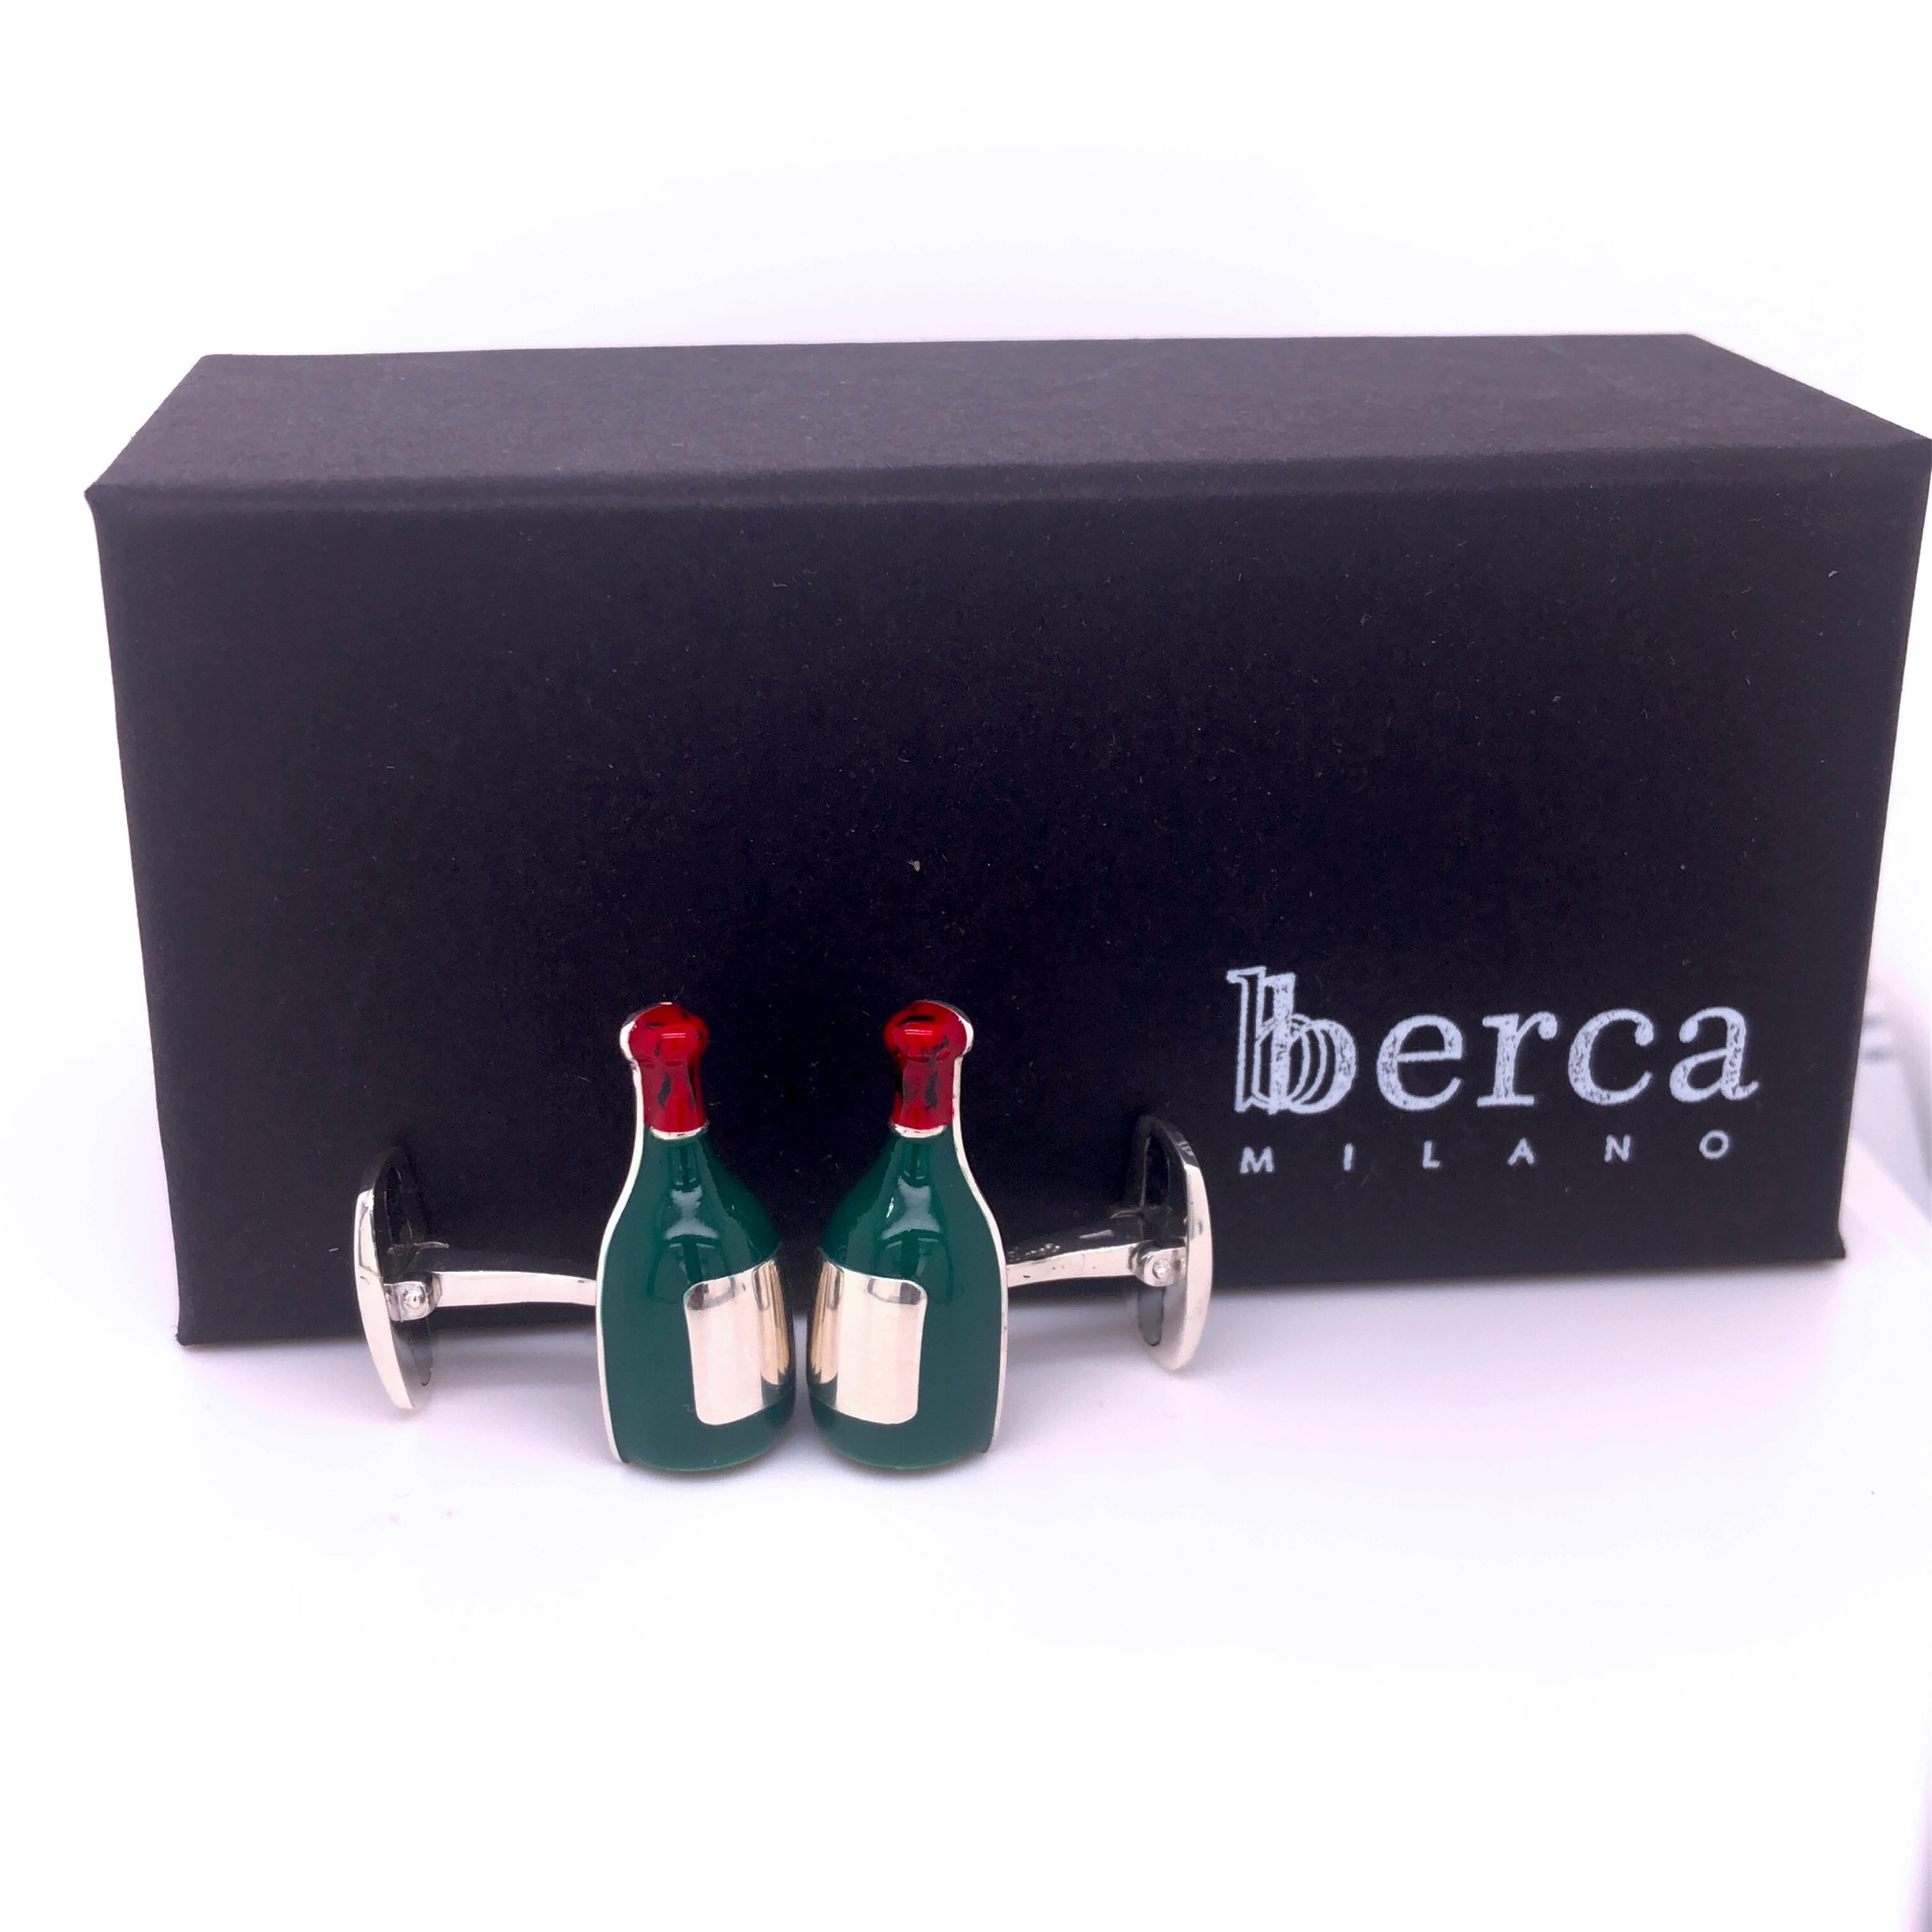 Chic and Unique Champagne Bottle Hand Enameled Sterling Silver Cufflinks, T-Bar Back.
In our smart fitted Black Box and Pouch.

